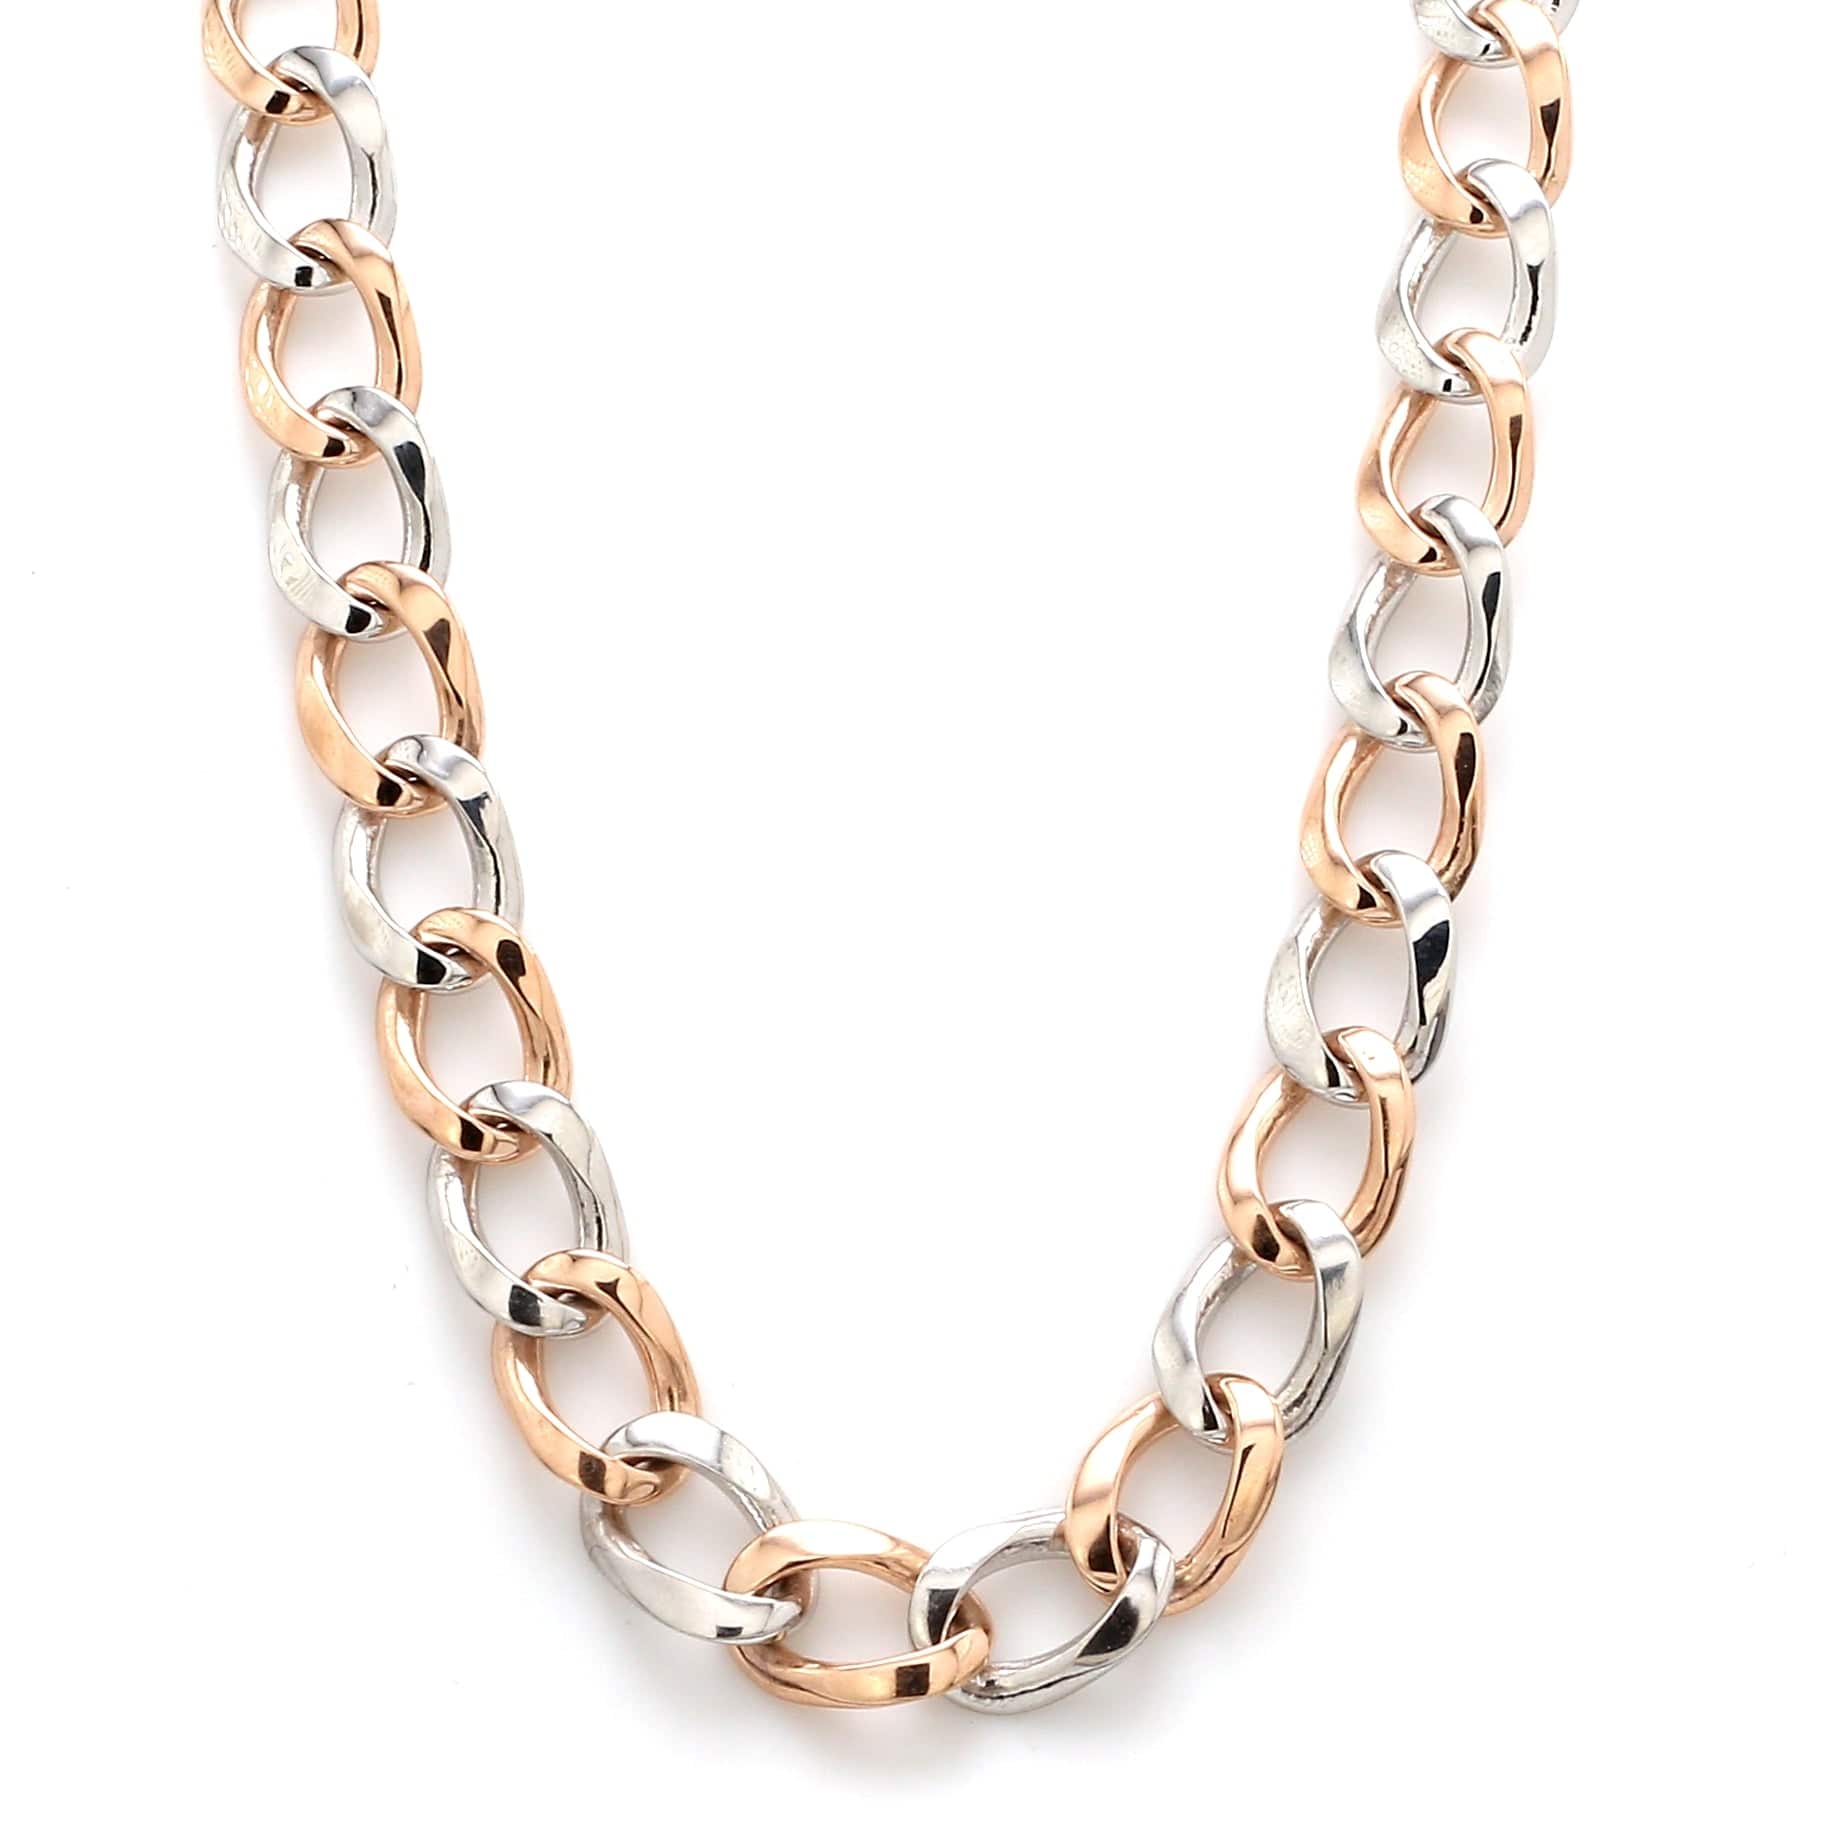 Leave Your Mark Chain Necklace Gold / B